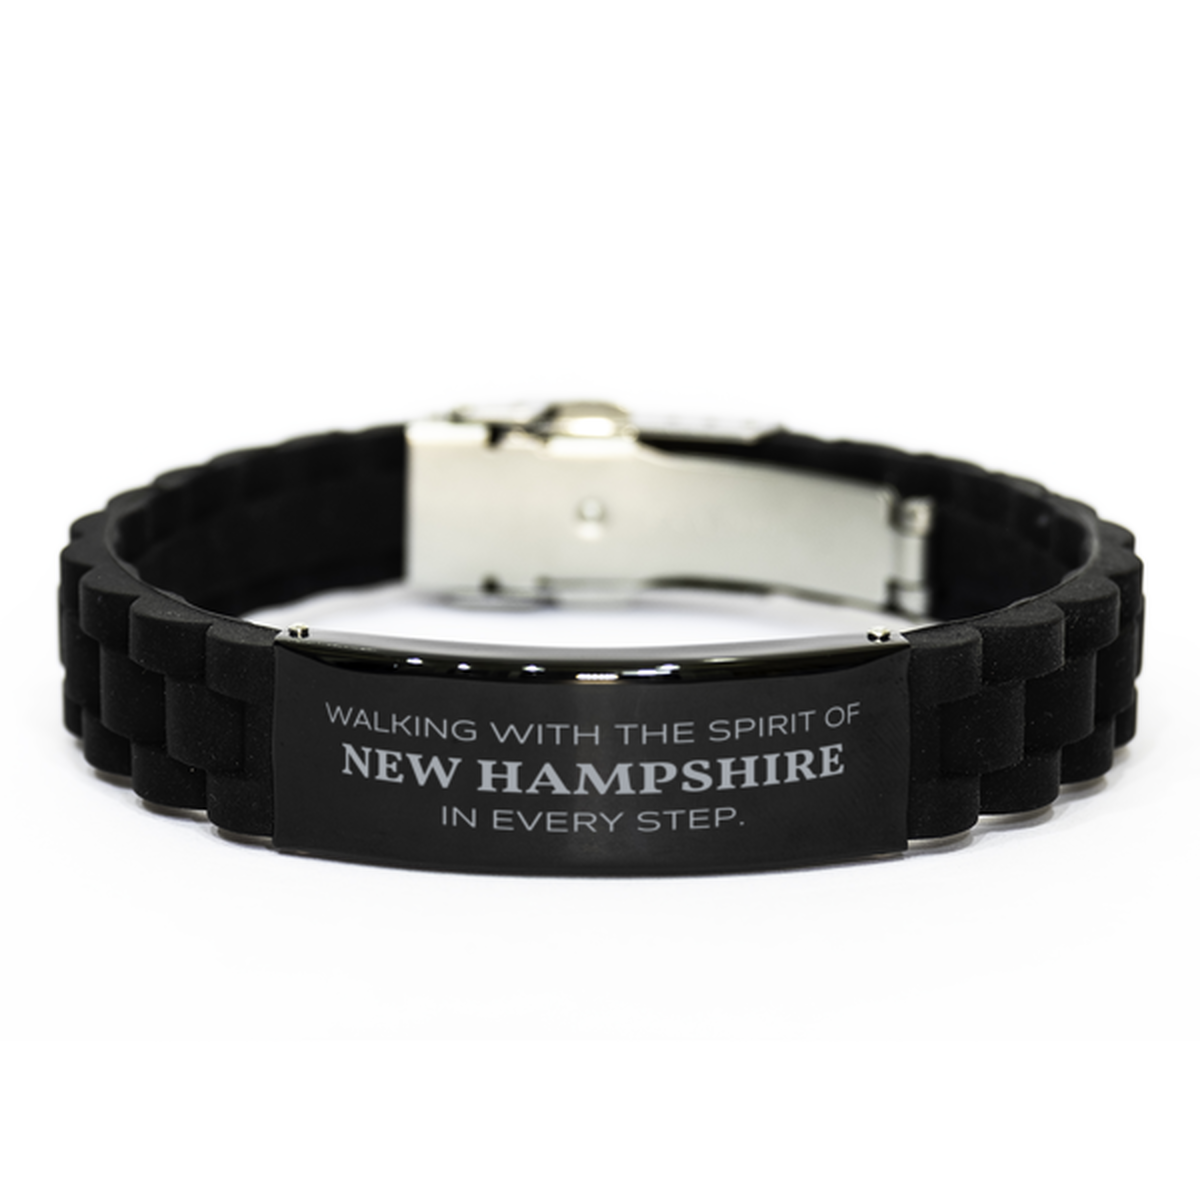 New Hampshire Gifts, Walking with the spirit, Love New Hampshire Birthday Christmas Black Glidelock Clasp Bracelet For New Hampshire People, Men, Women, Friends